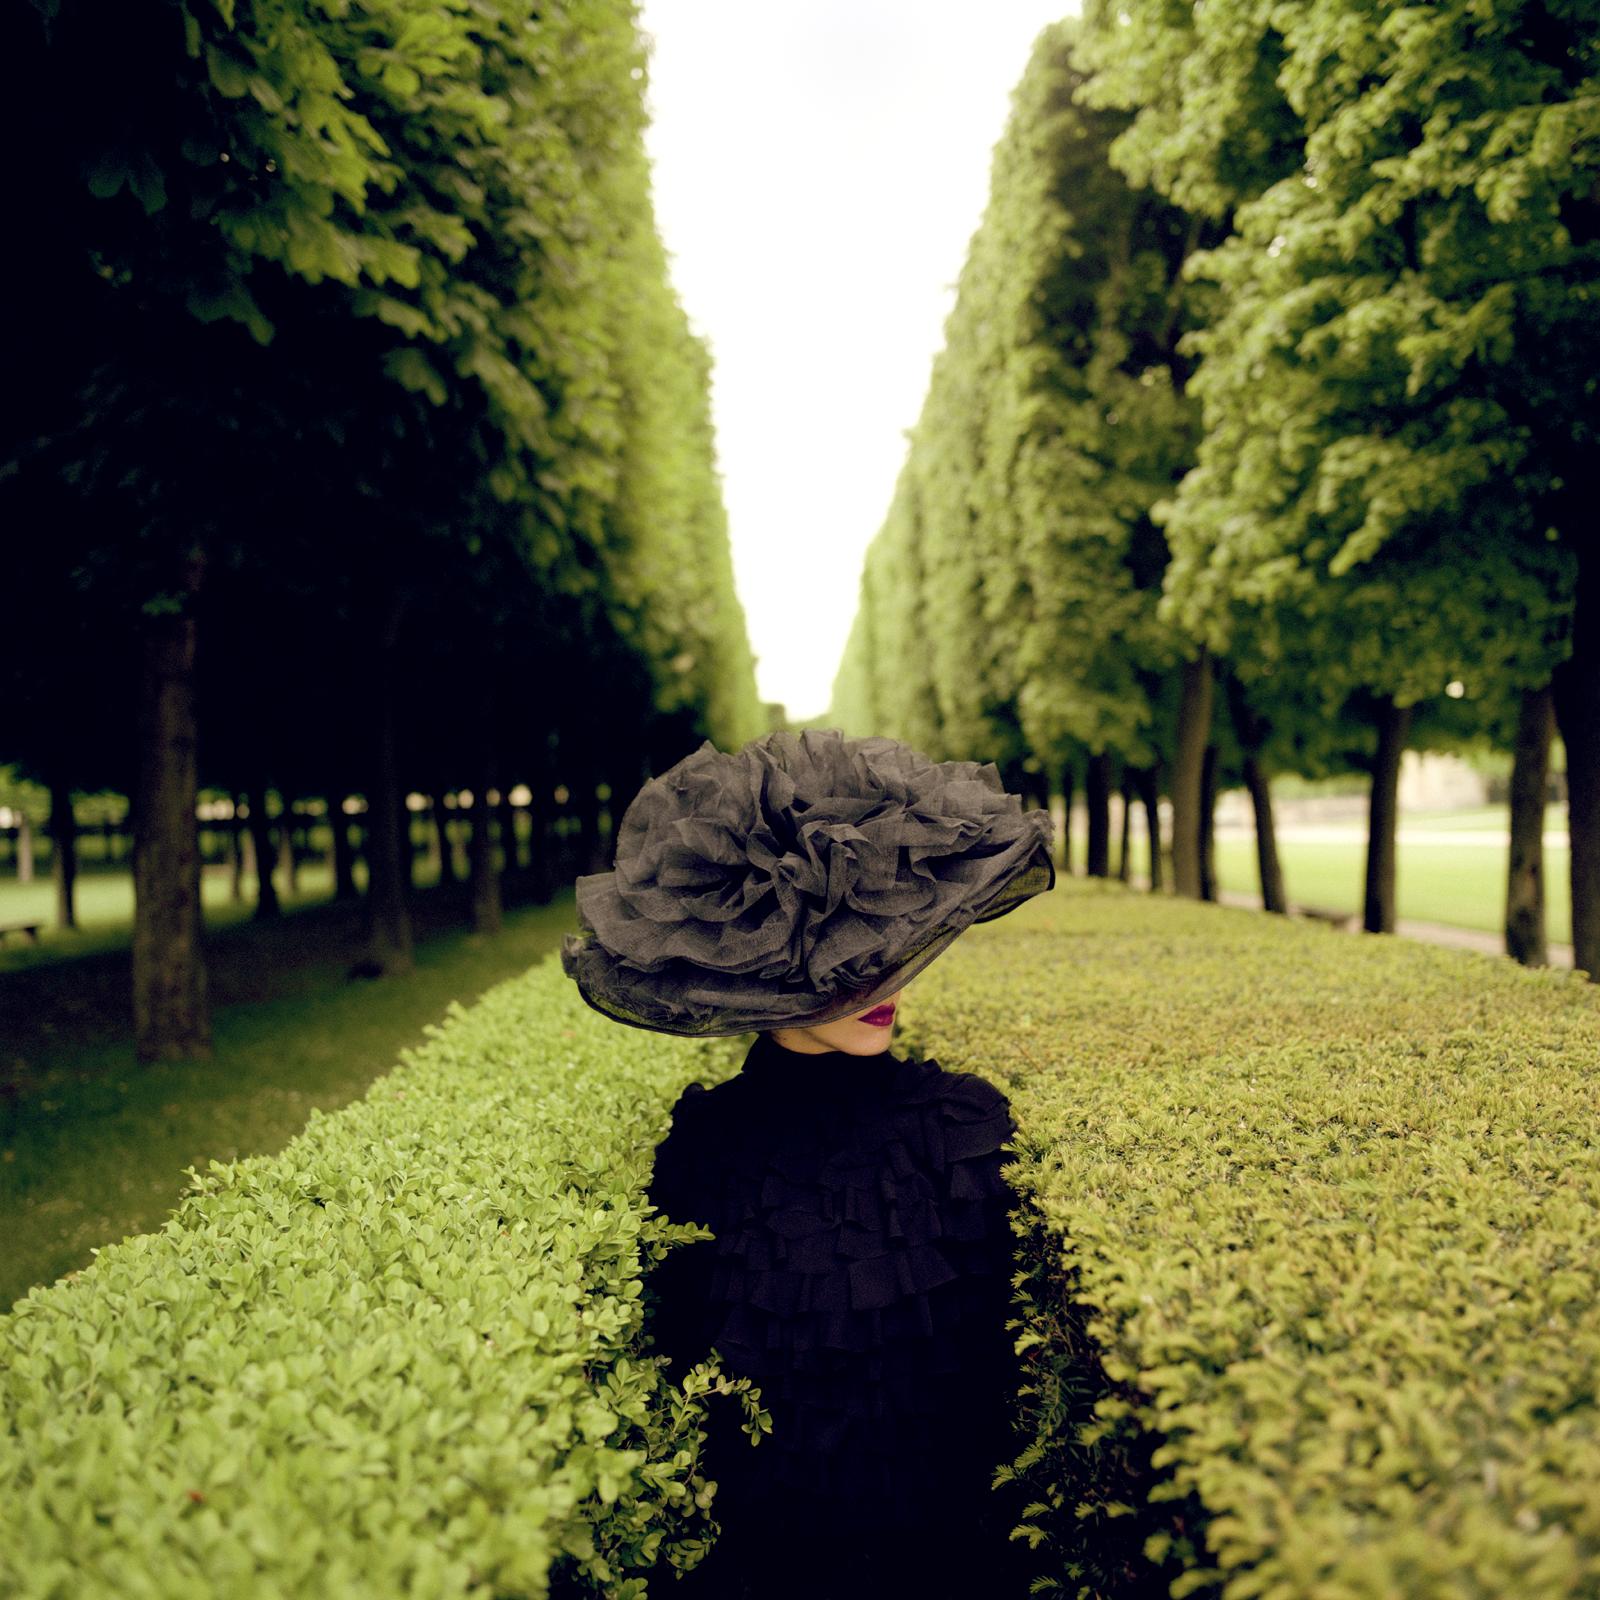 Rodney Smith Color Photograph - Woman with Hat Between Hedges, Parc de Sceaux, France - 50 x 50 inches framed